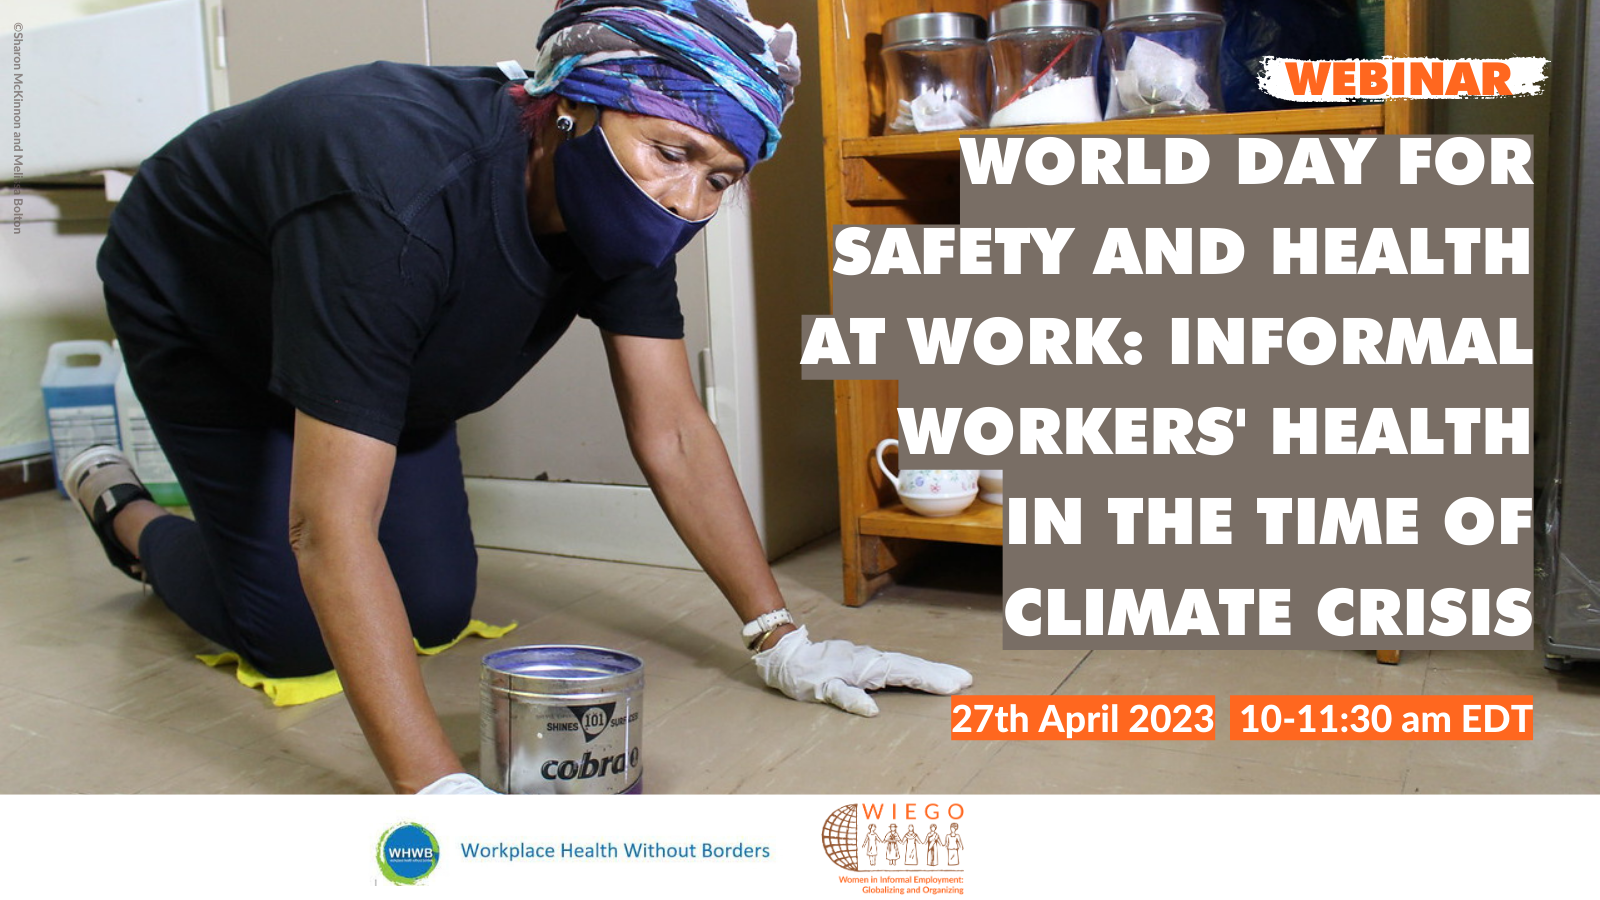 World Day for Safety and Health at Work - April 27, 2023